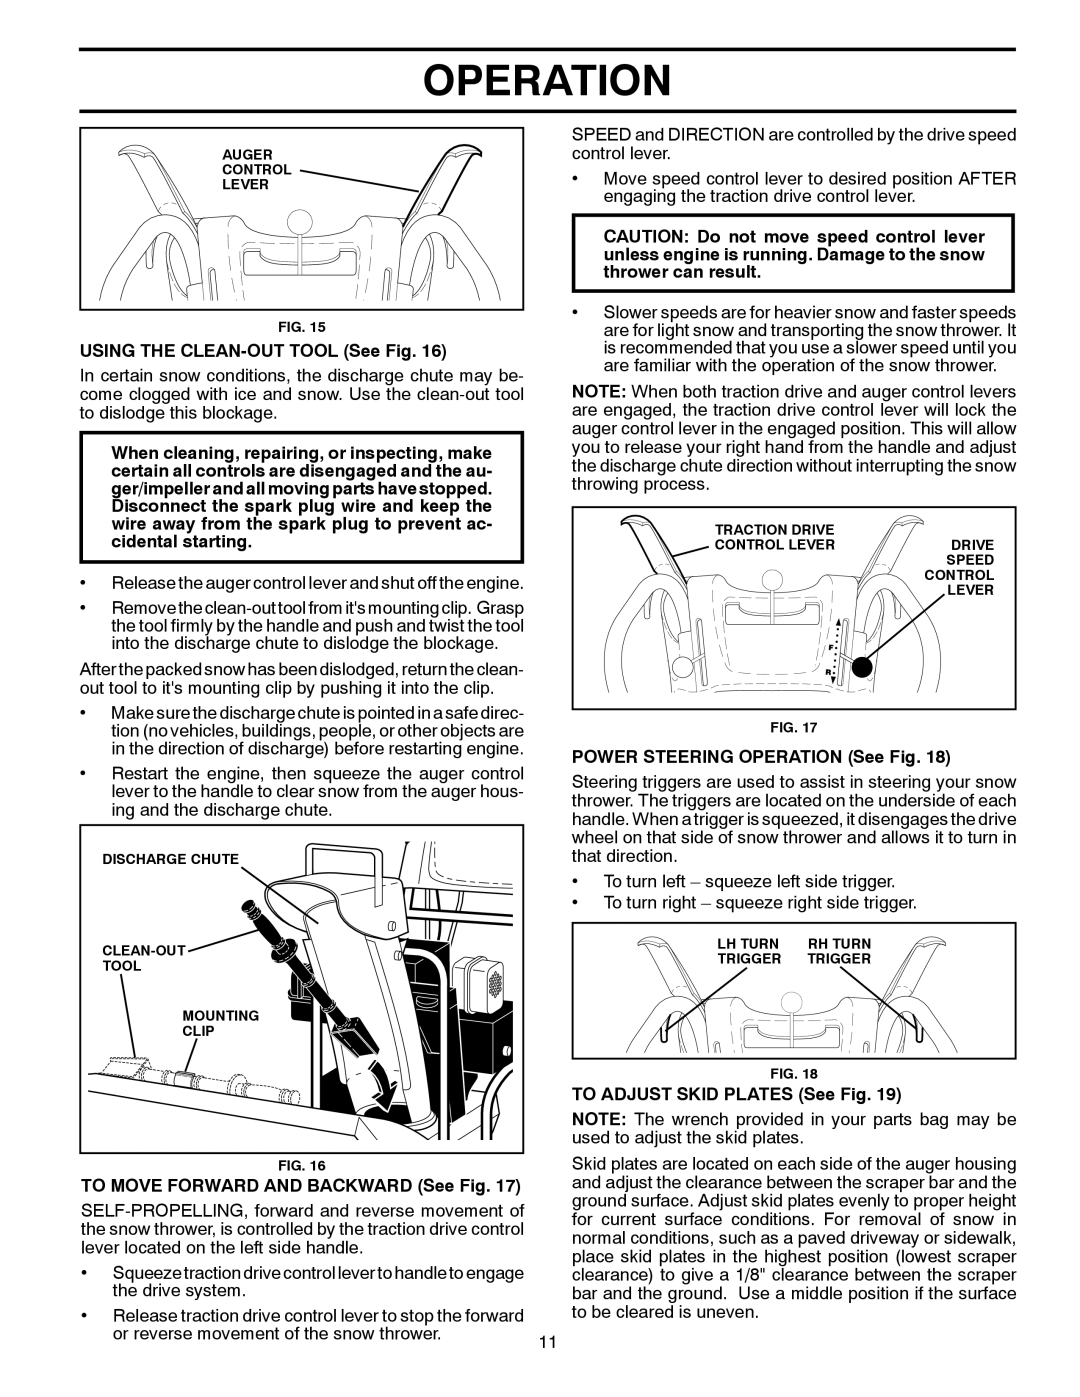 Husqvarna 924SB-XLS owner manual Operation, USING THE CLEAN-OUTTOOL See Fig, TO MOVE FORWARD AND BACKWARD See Fig 